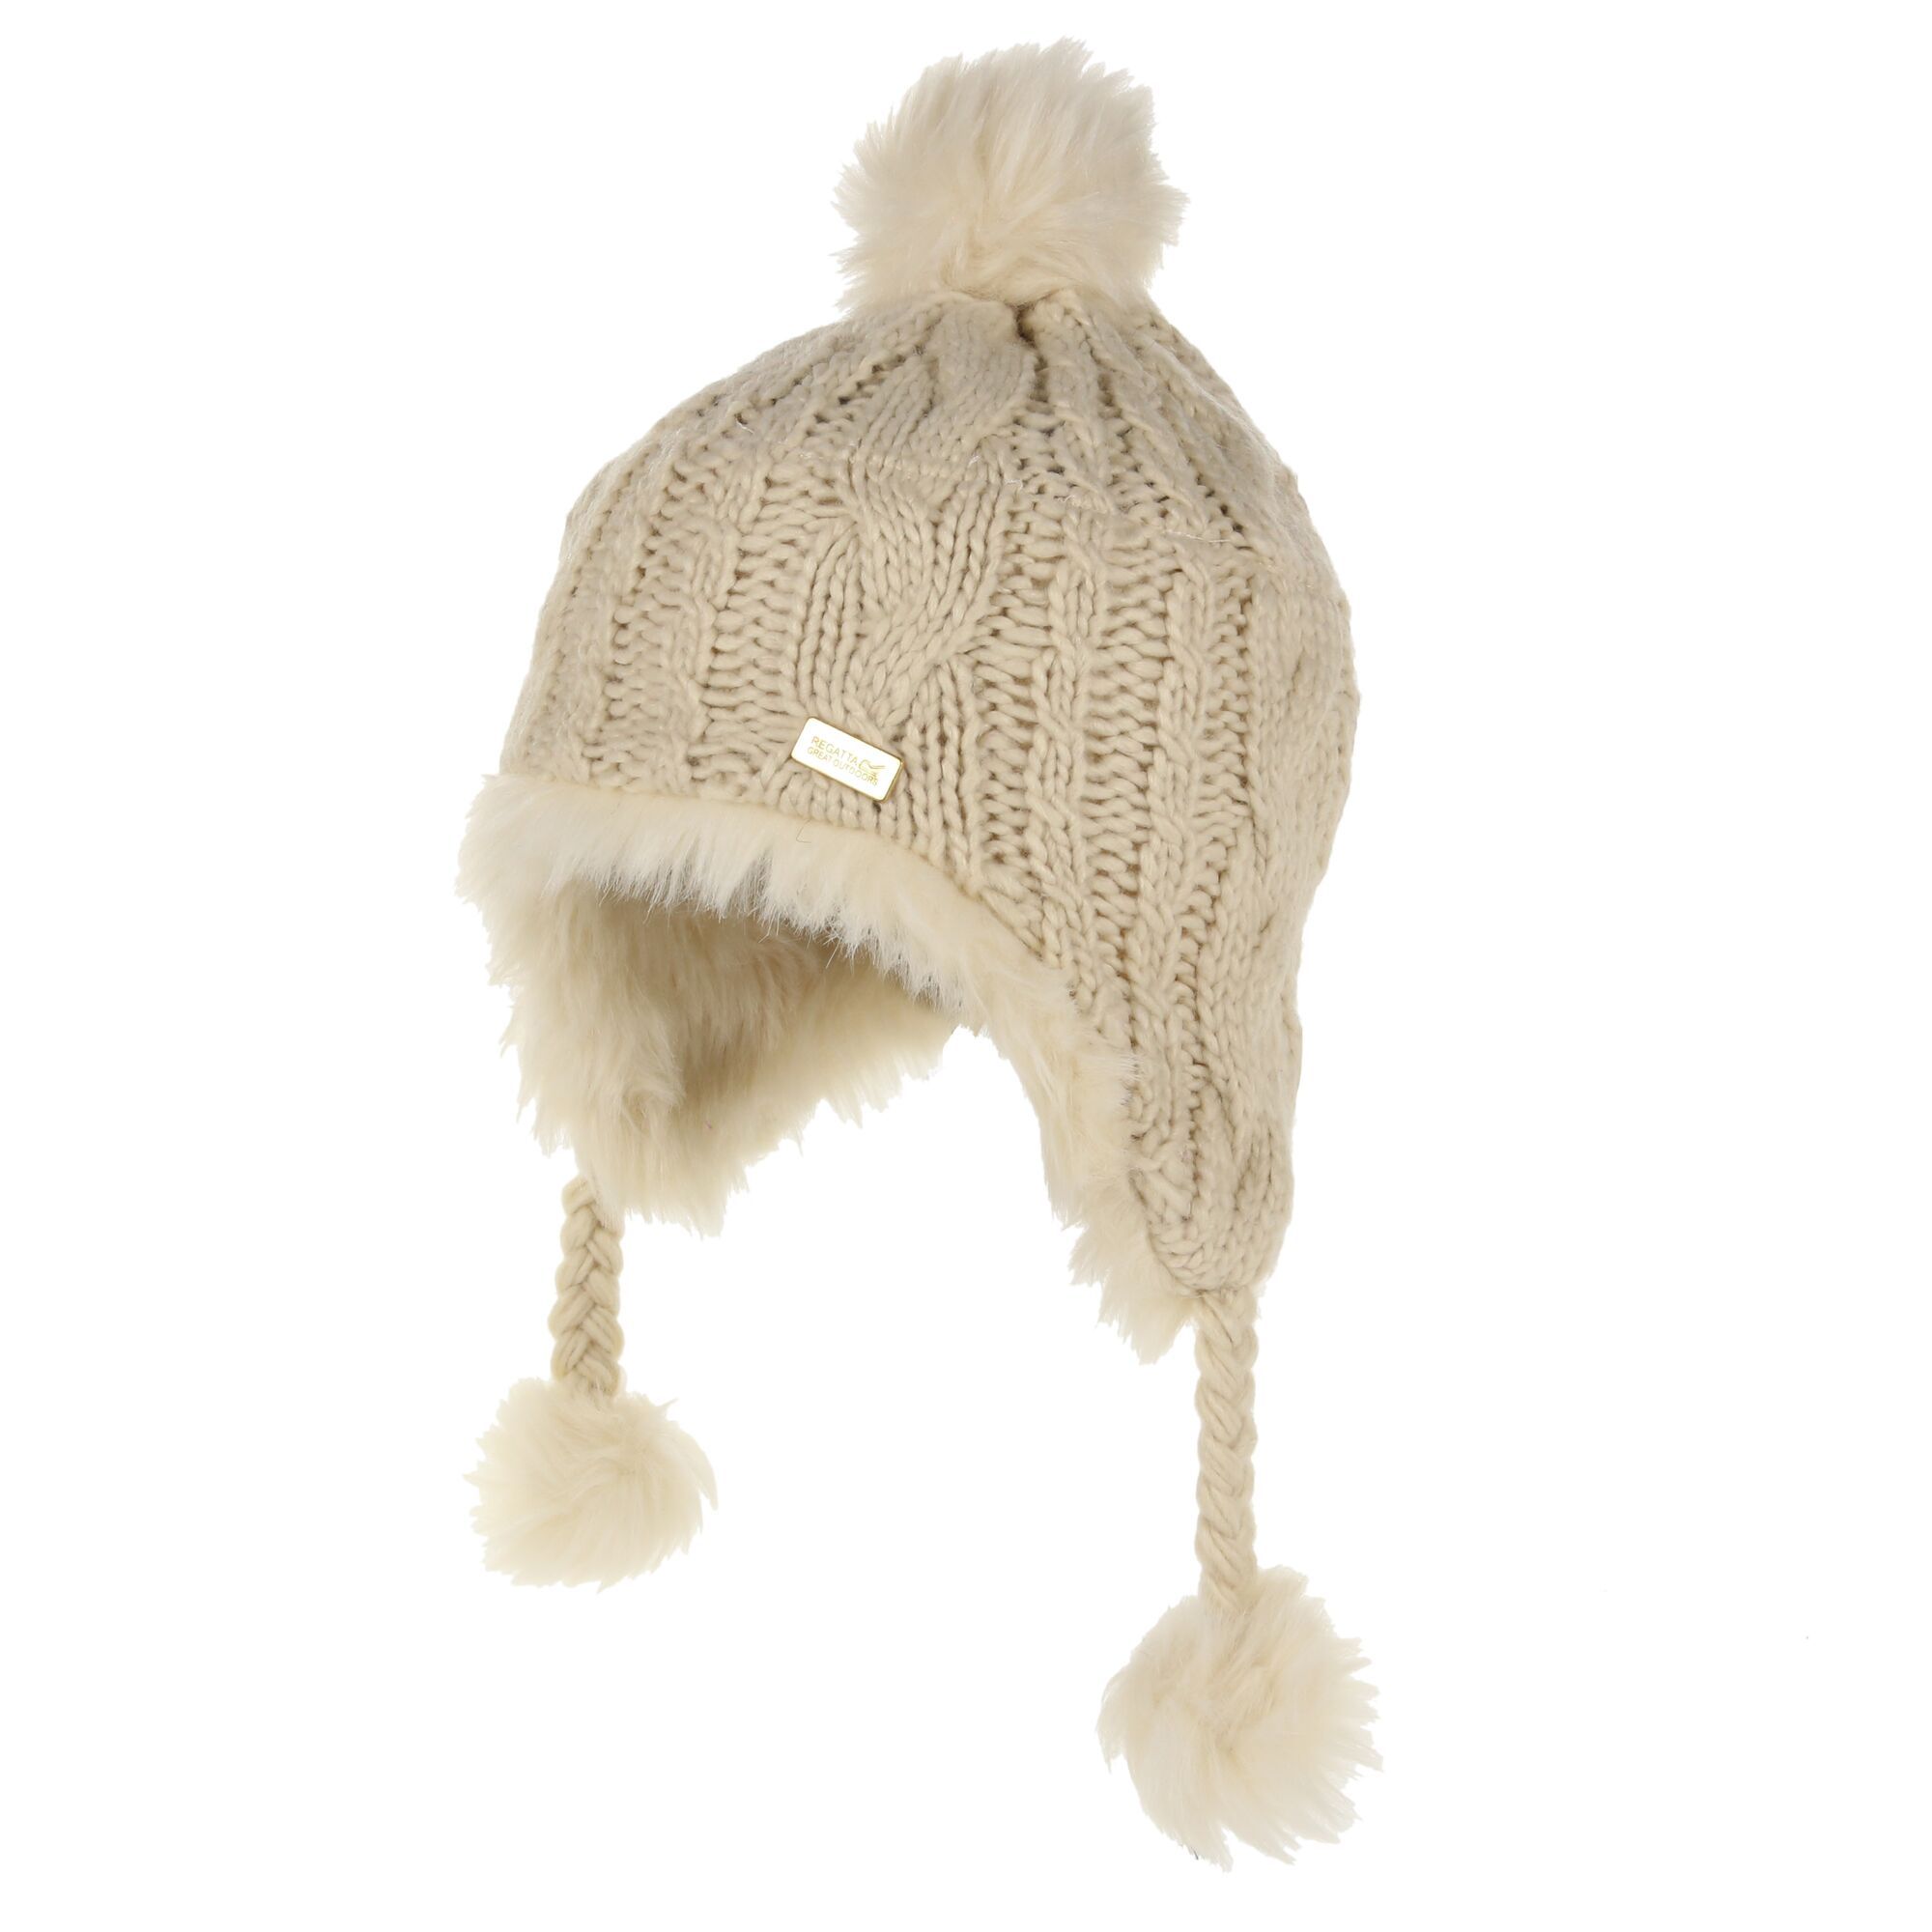 Material: 50% acrylic, 50% polyester. This gorgeous cable-knit hat will keep their head and ears cosy and warm. Designed to be super toasty with a soft faux-fur lining and finished with super cute pom pom.